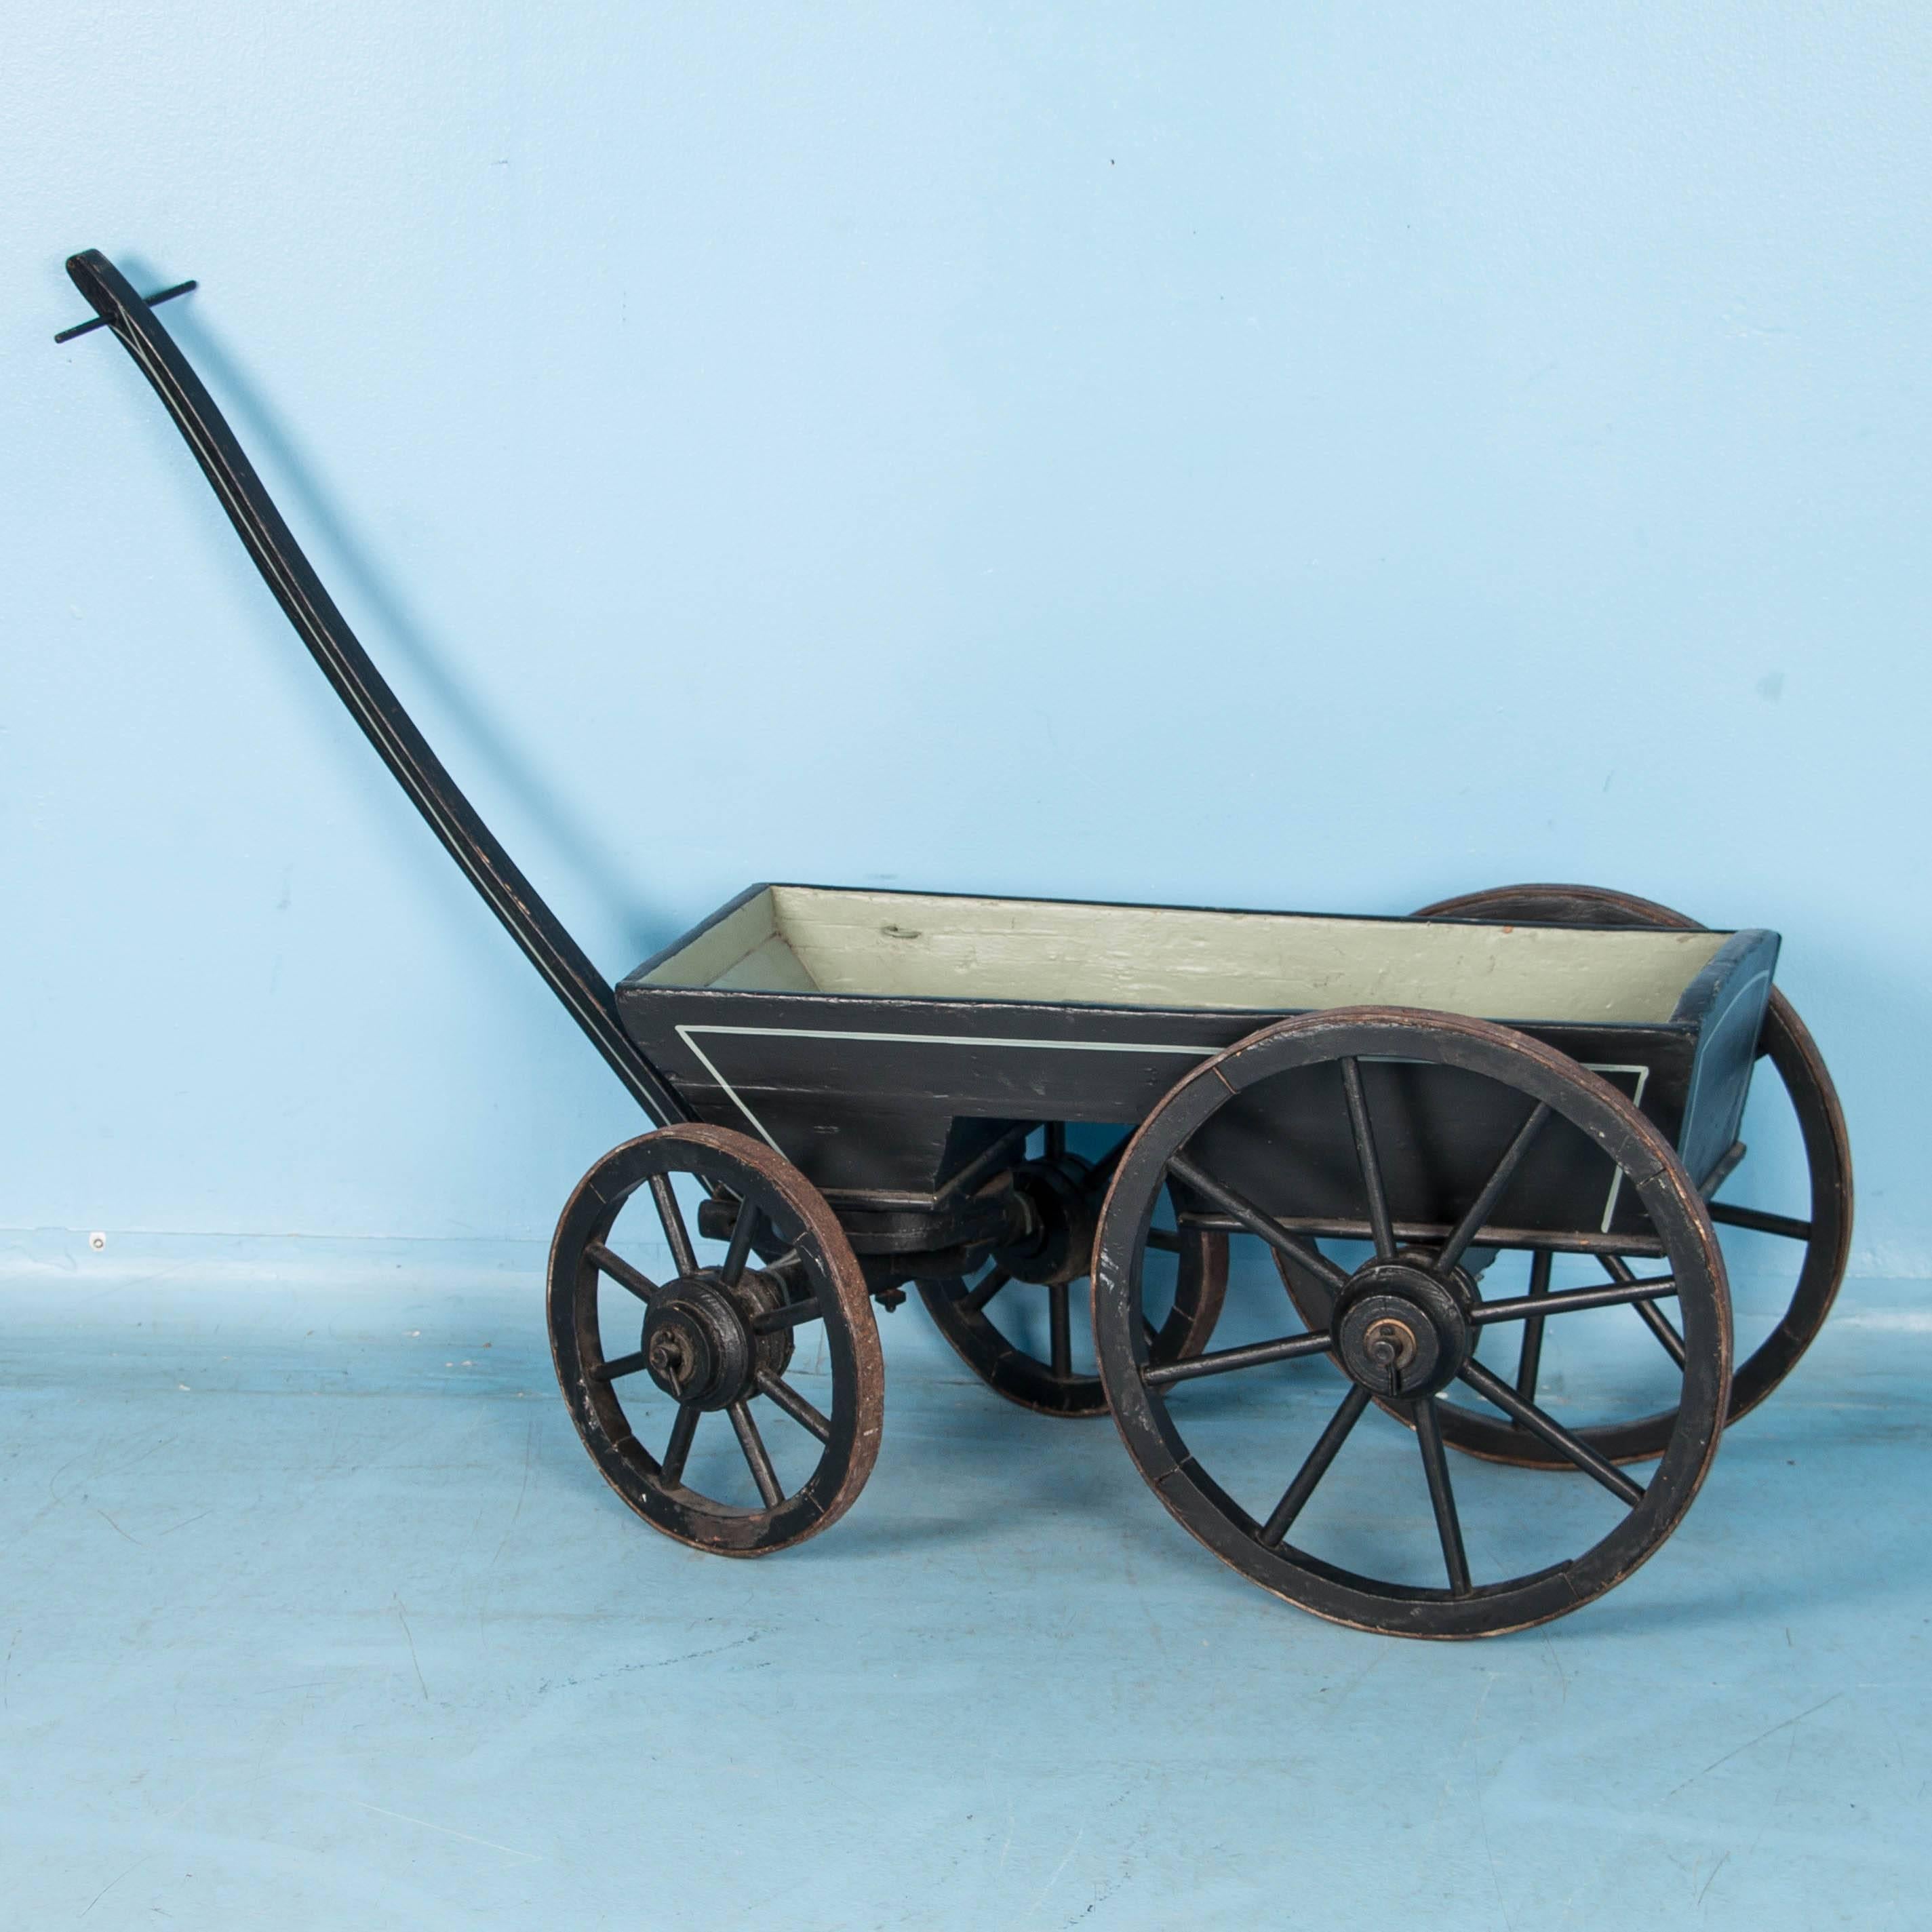 This late 19th century farm style wagon has a wonderful aged patina with the exterior painted black and a sage green interior.  Different than most farm wagons, this one was probably made for children, with it's solid sides and interior seat. The